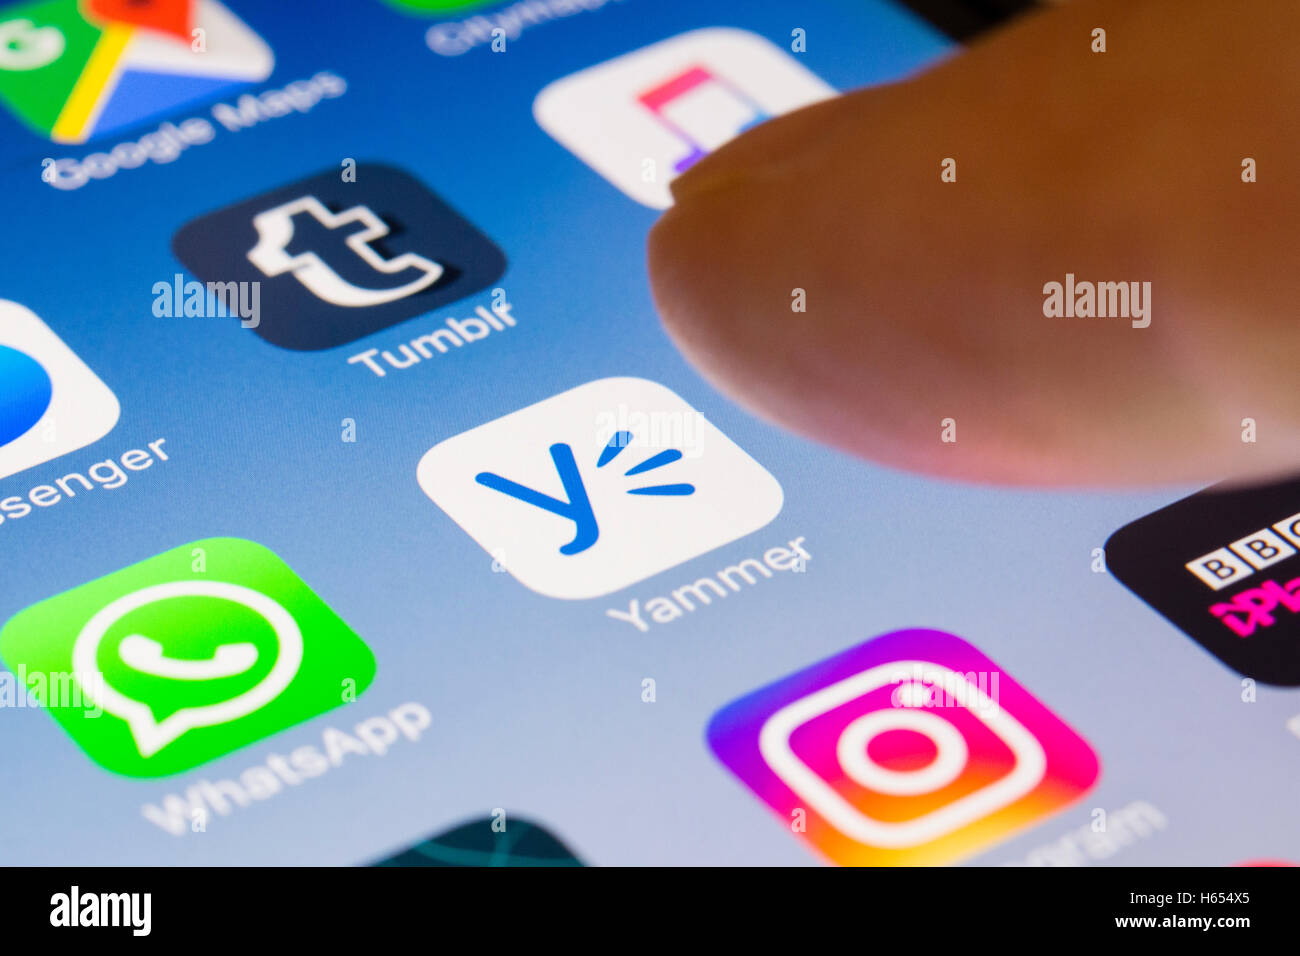 Yammer professional social networking app close up on iPhone smart phone screen Stock Photo